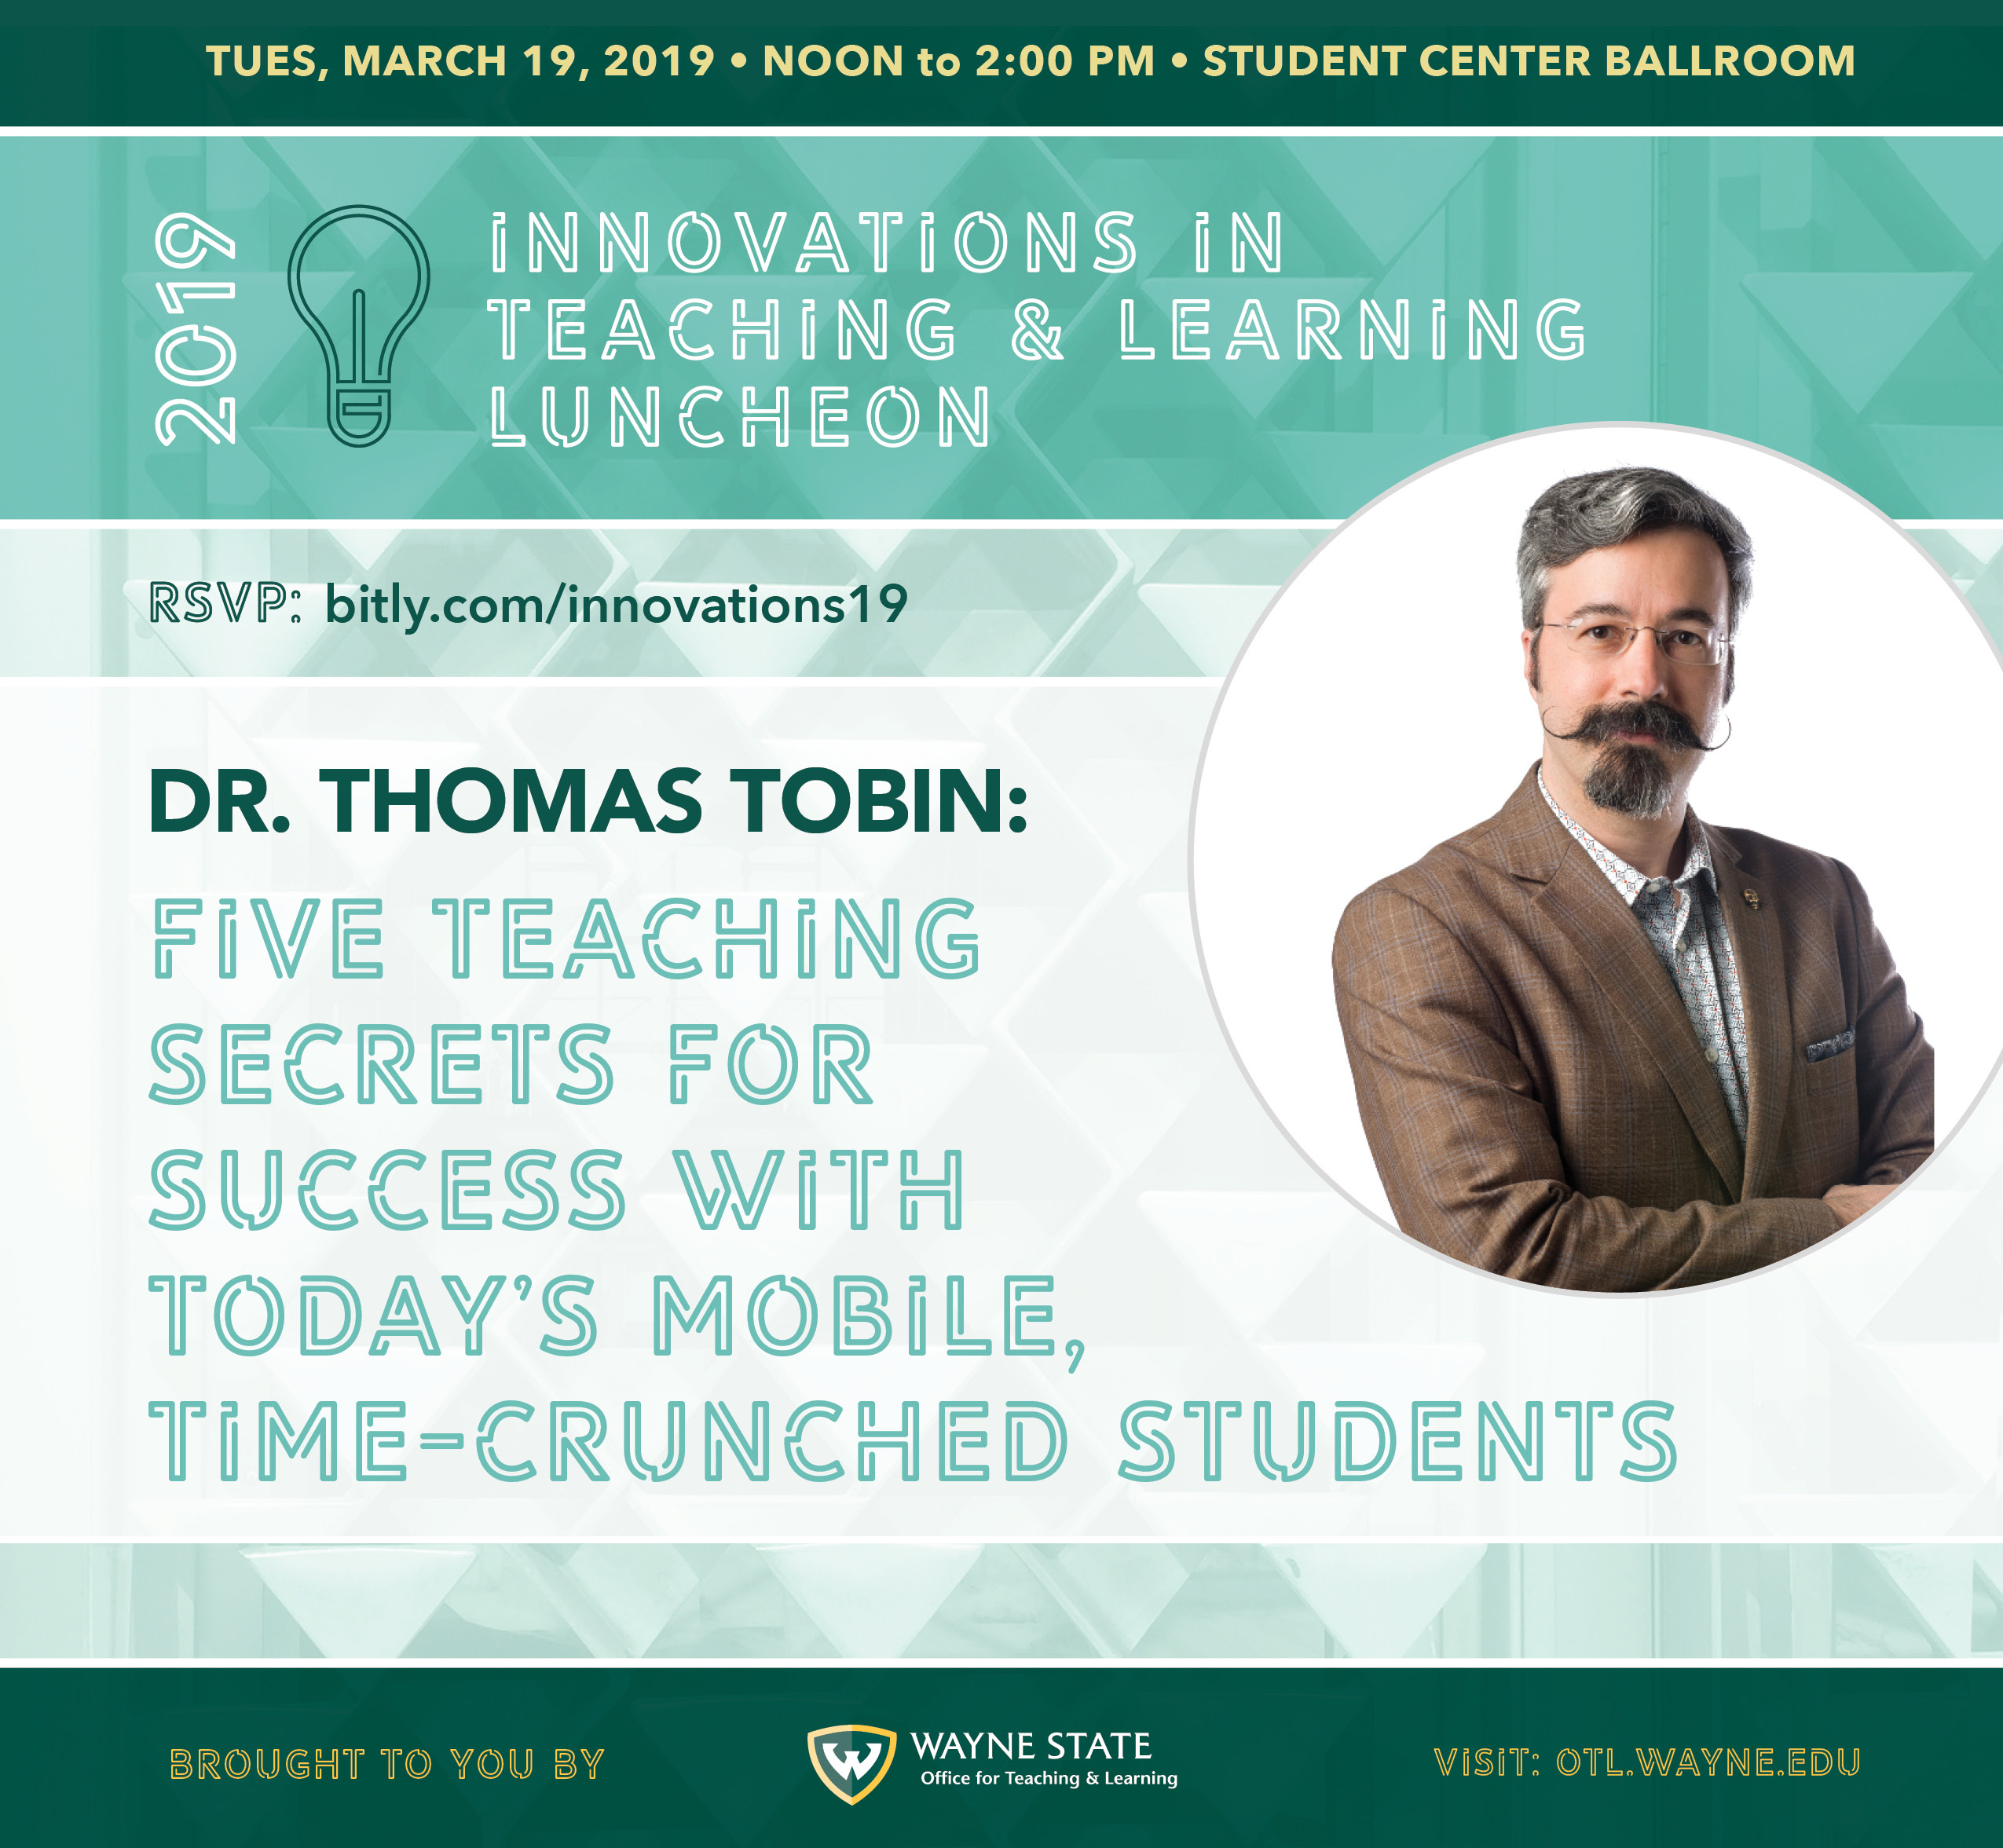 Dr. Thomas Tobin: Five Teaching Secrets for Success with Today's Mobile, Time Crunched Students